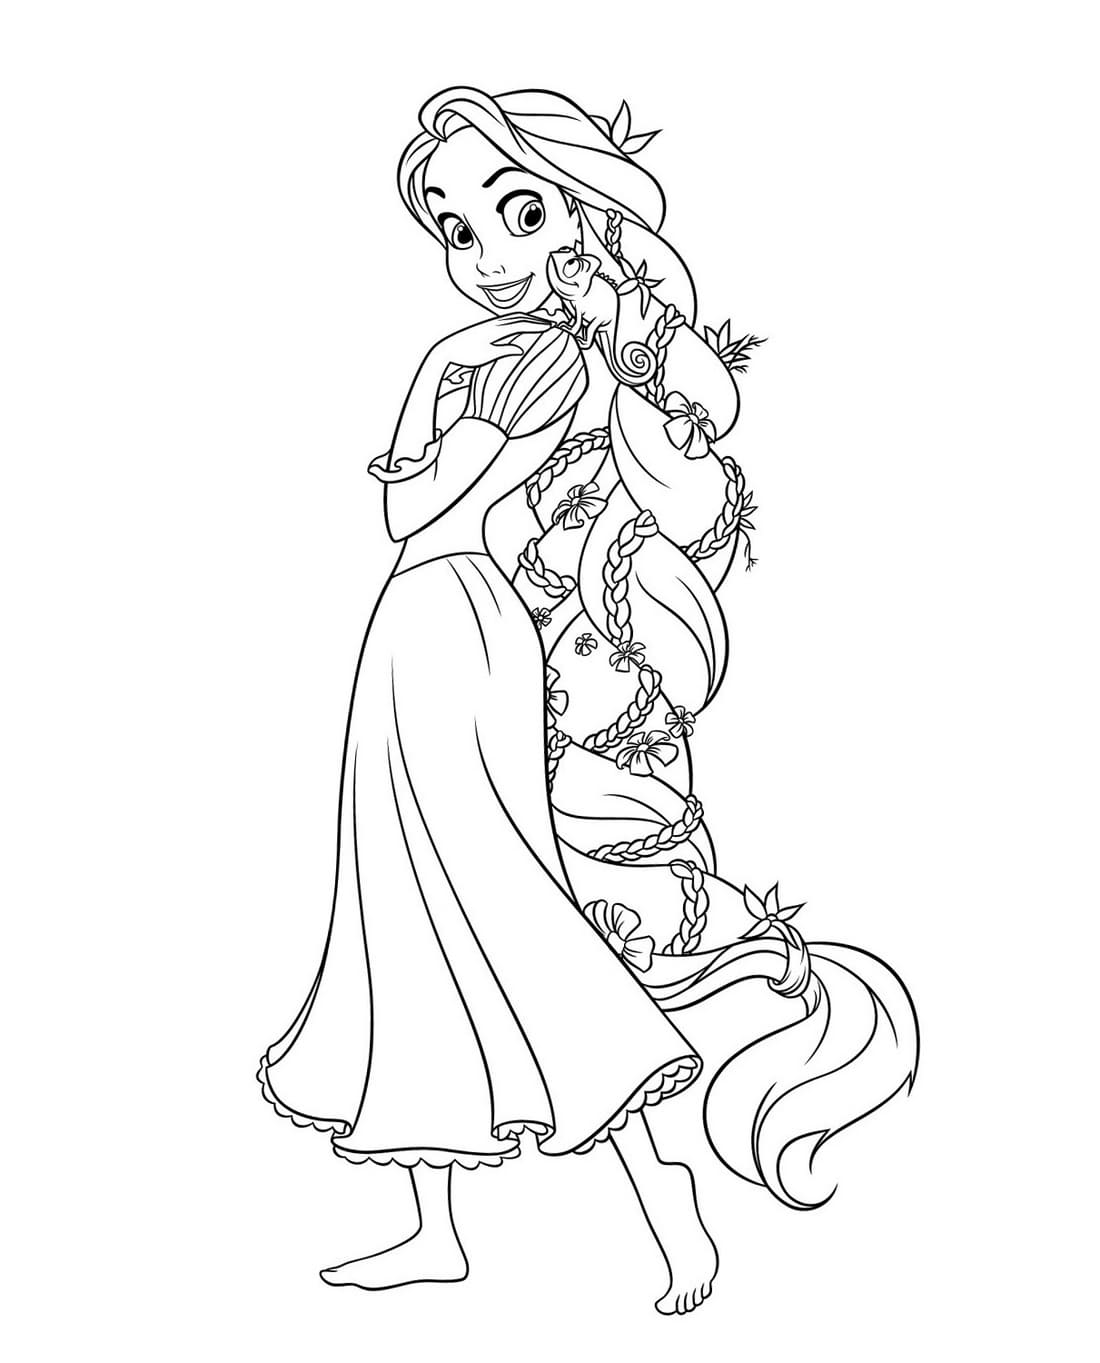 rapunzel tower coloring page